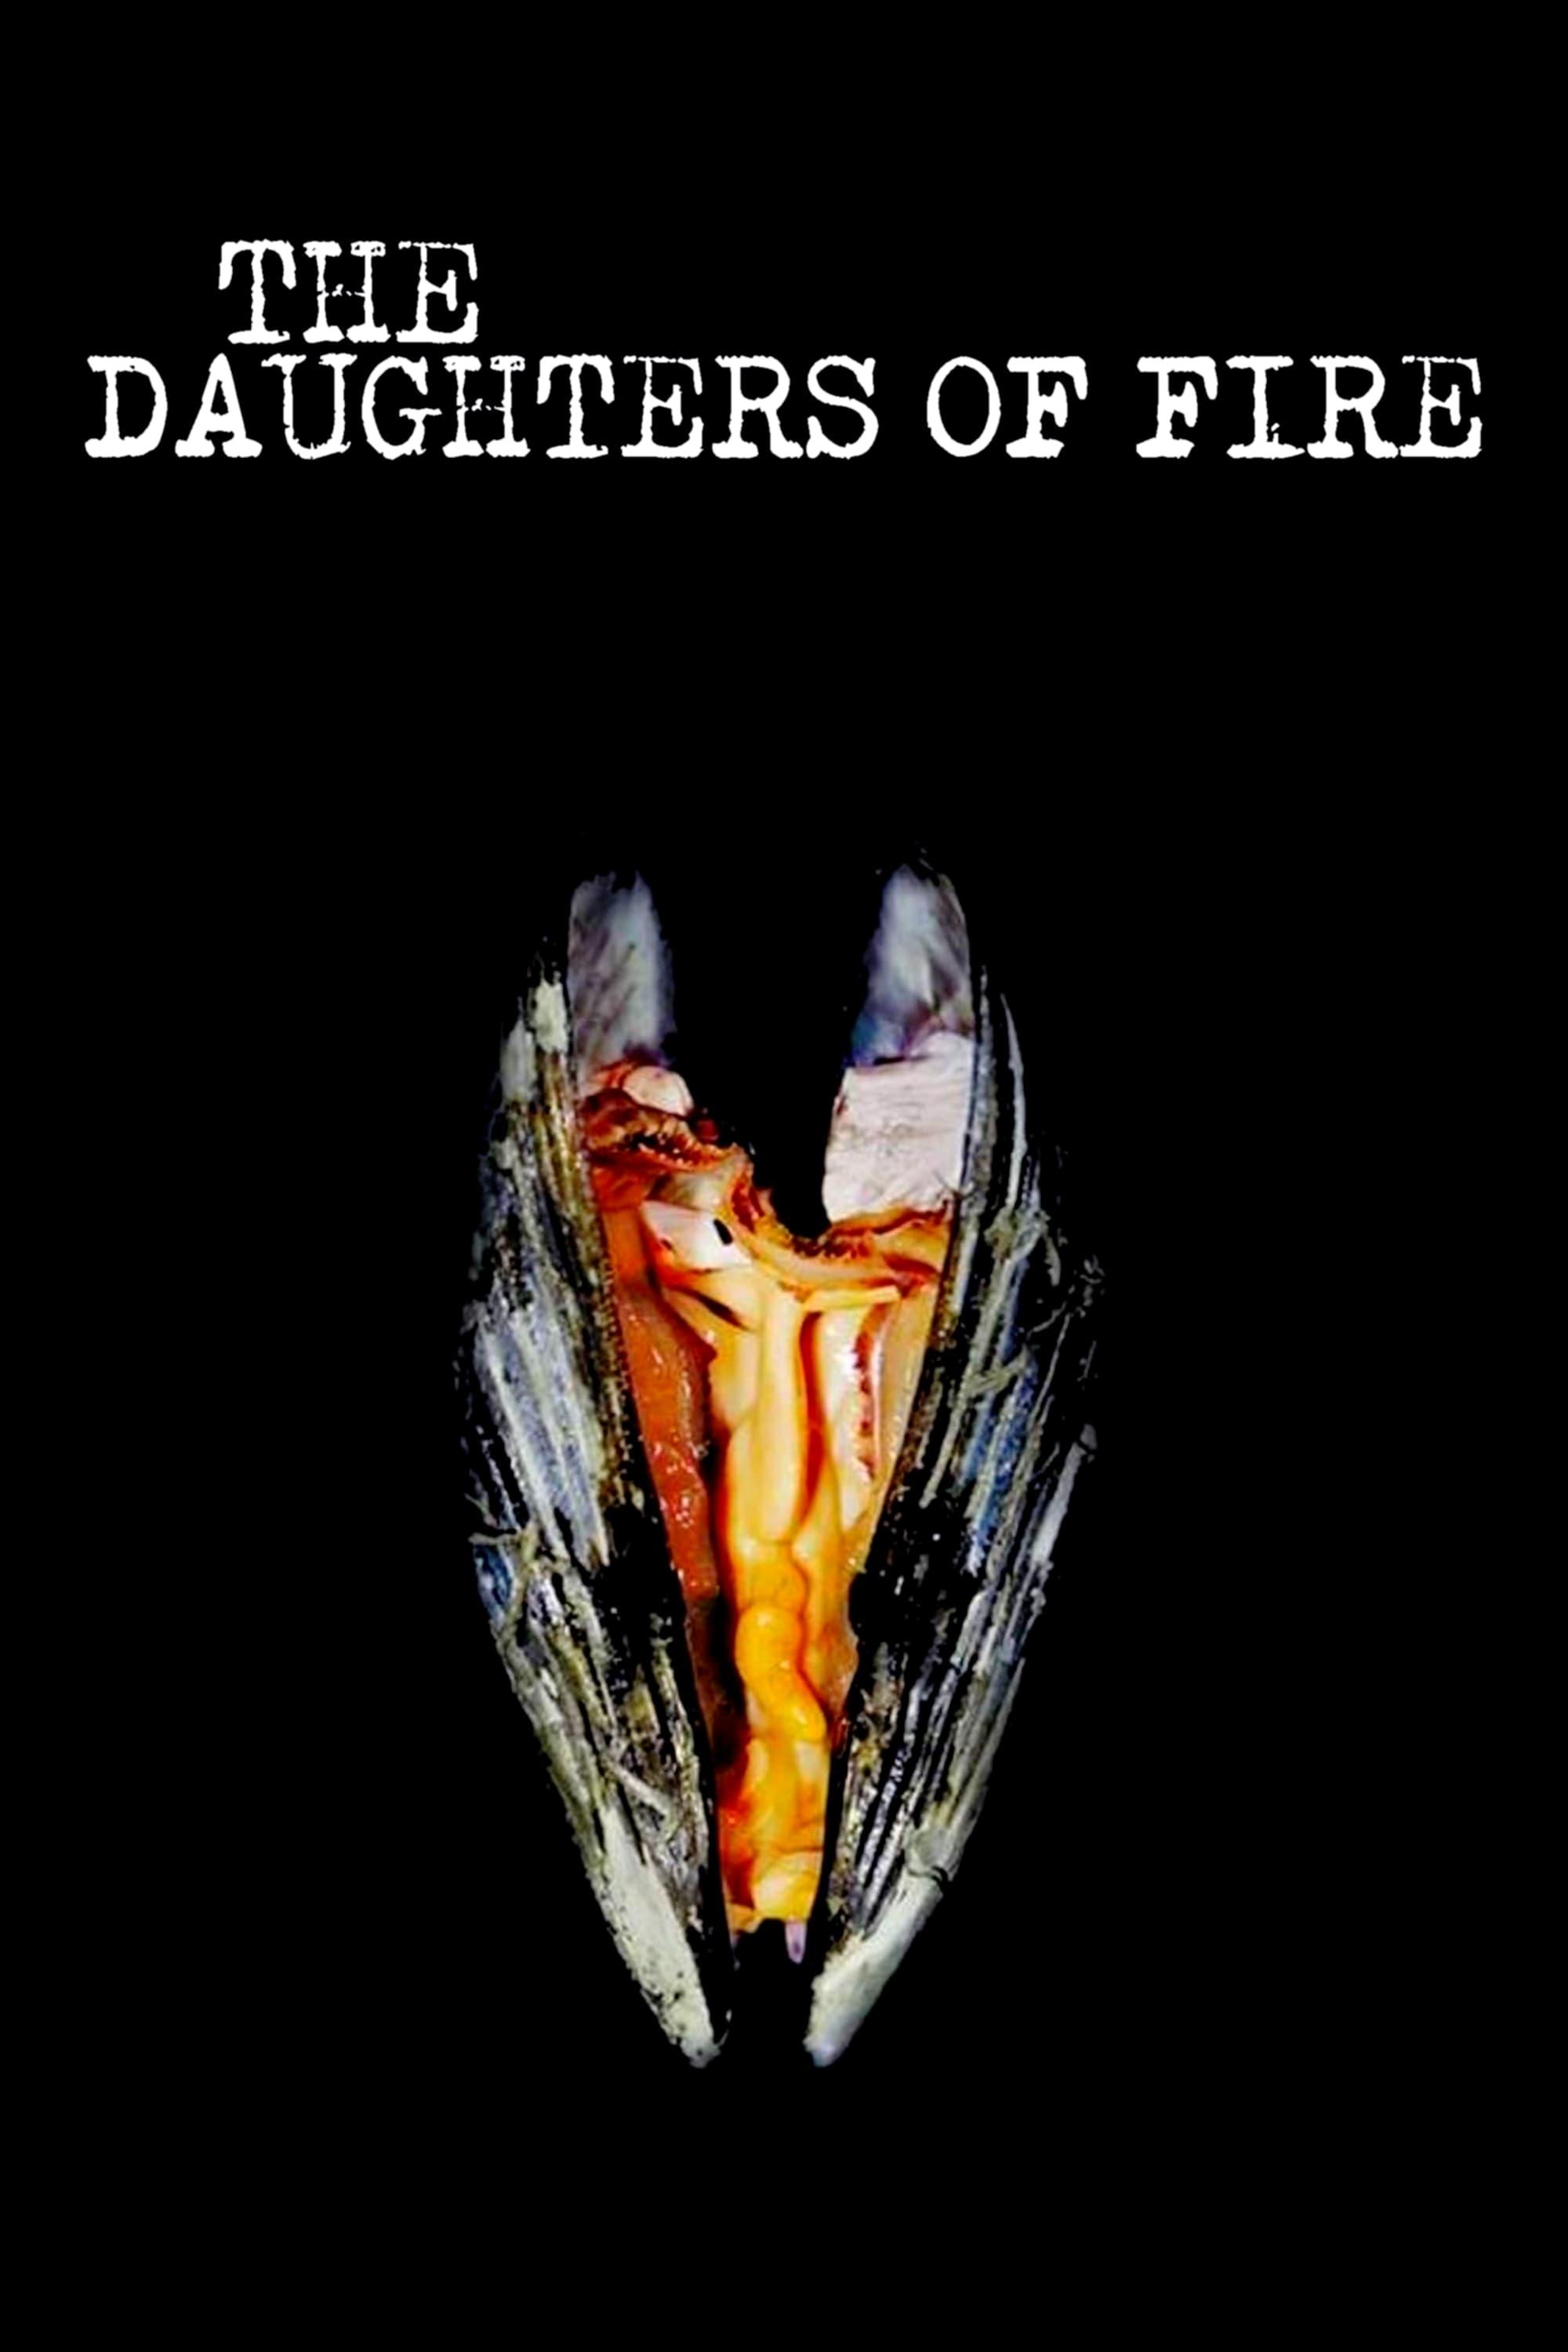 The Daughters of Fire poster